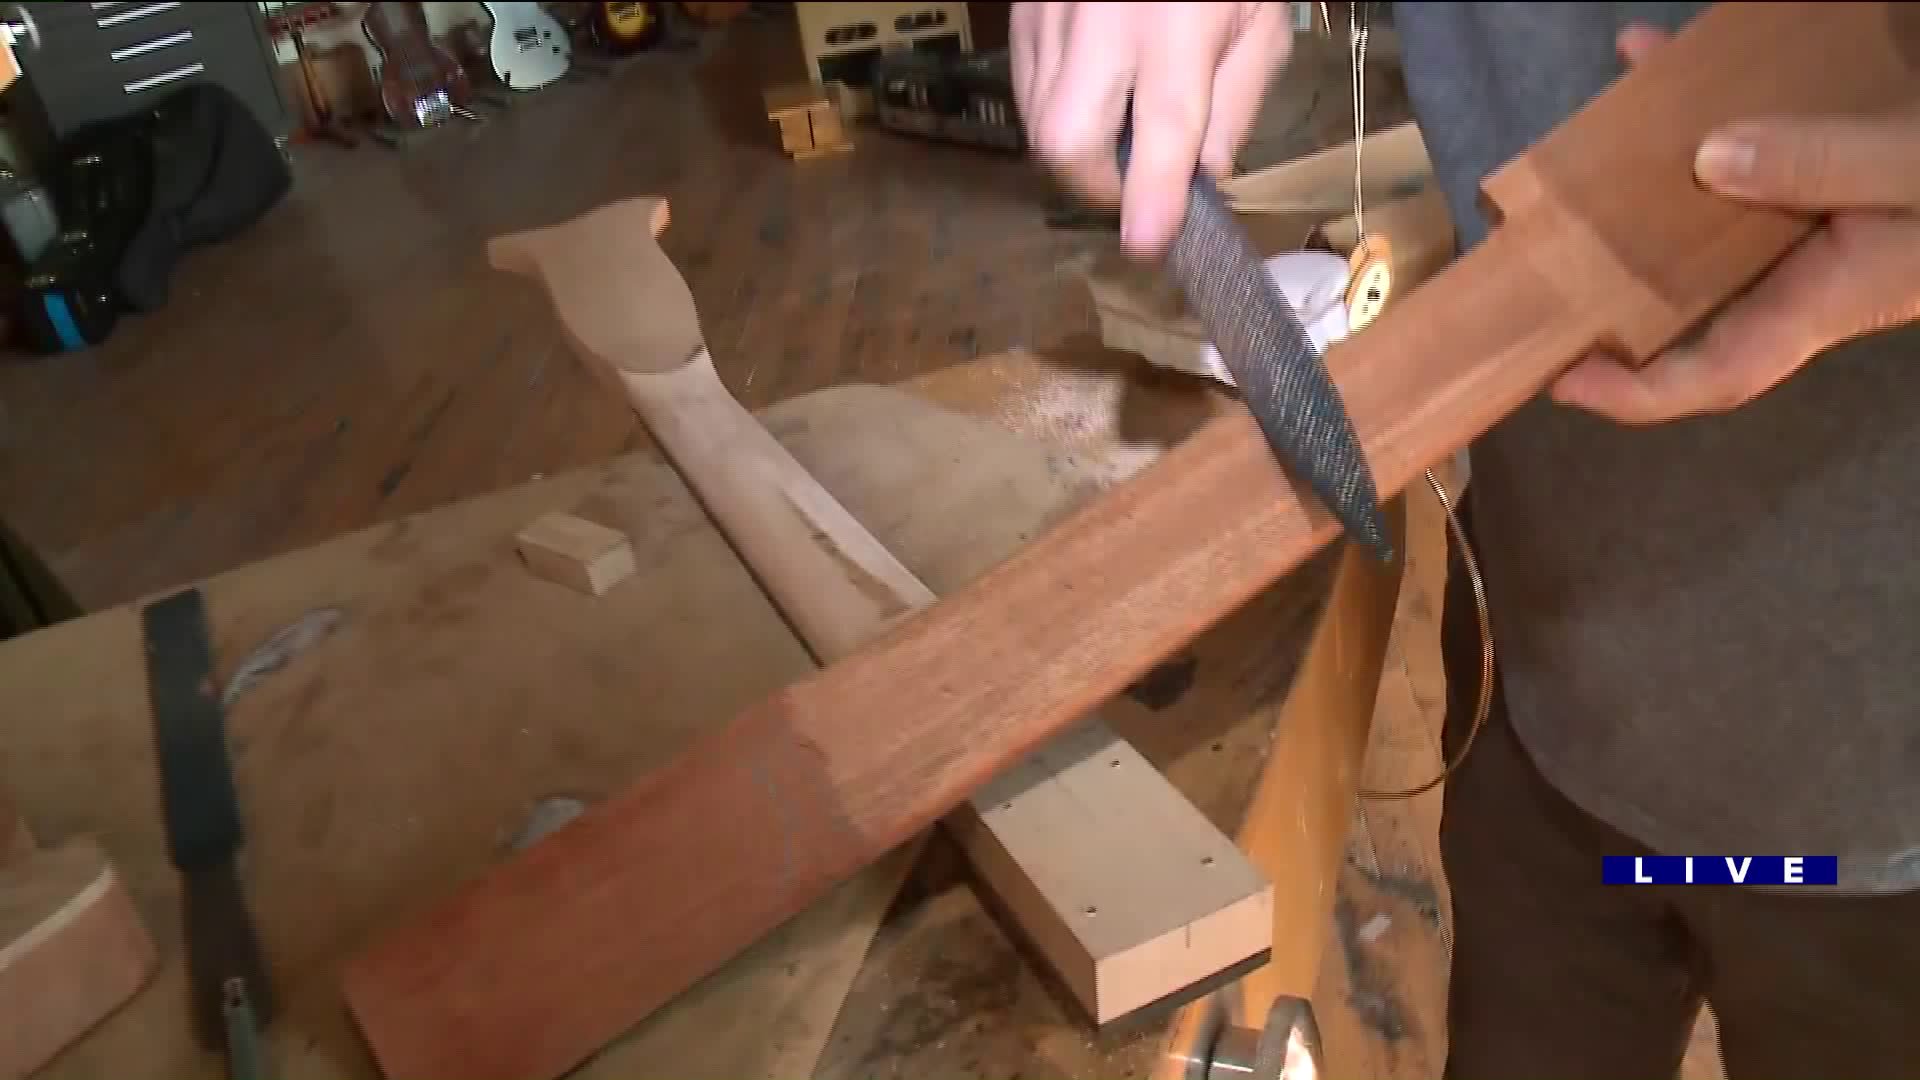 Around Town learns about the Chicago School of Guitar Making